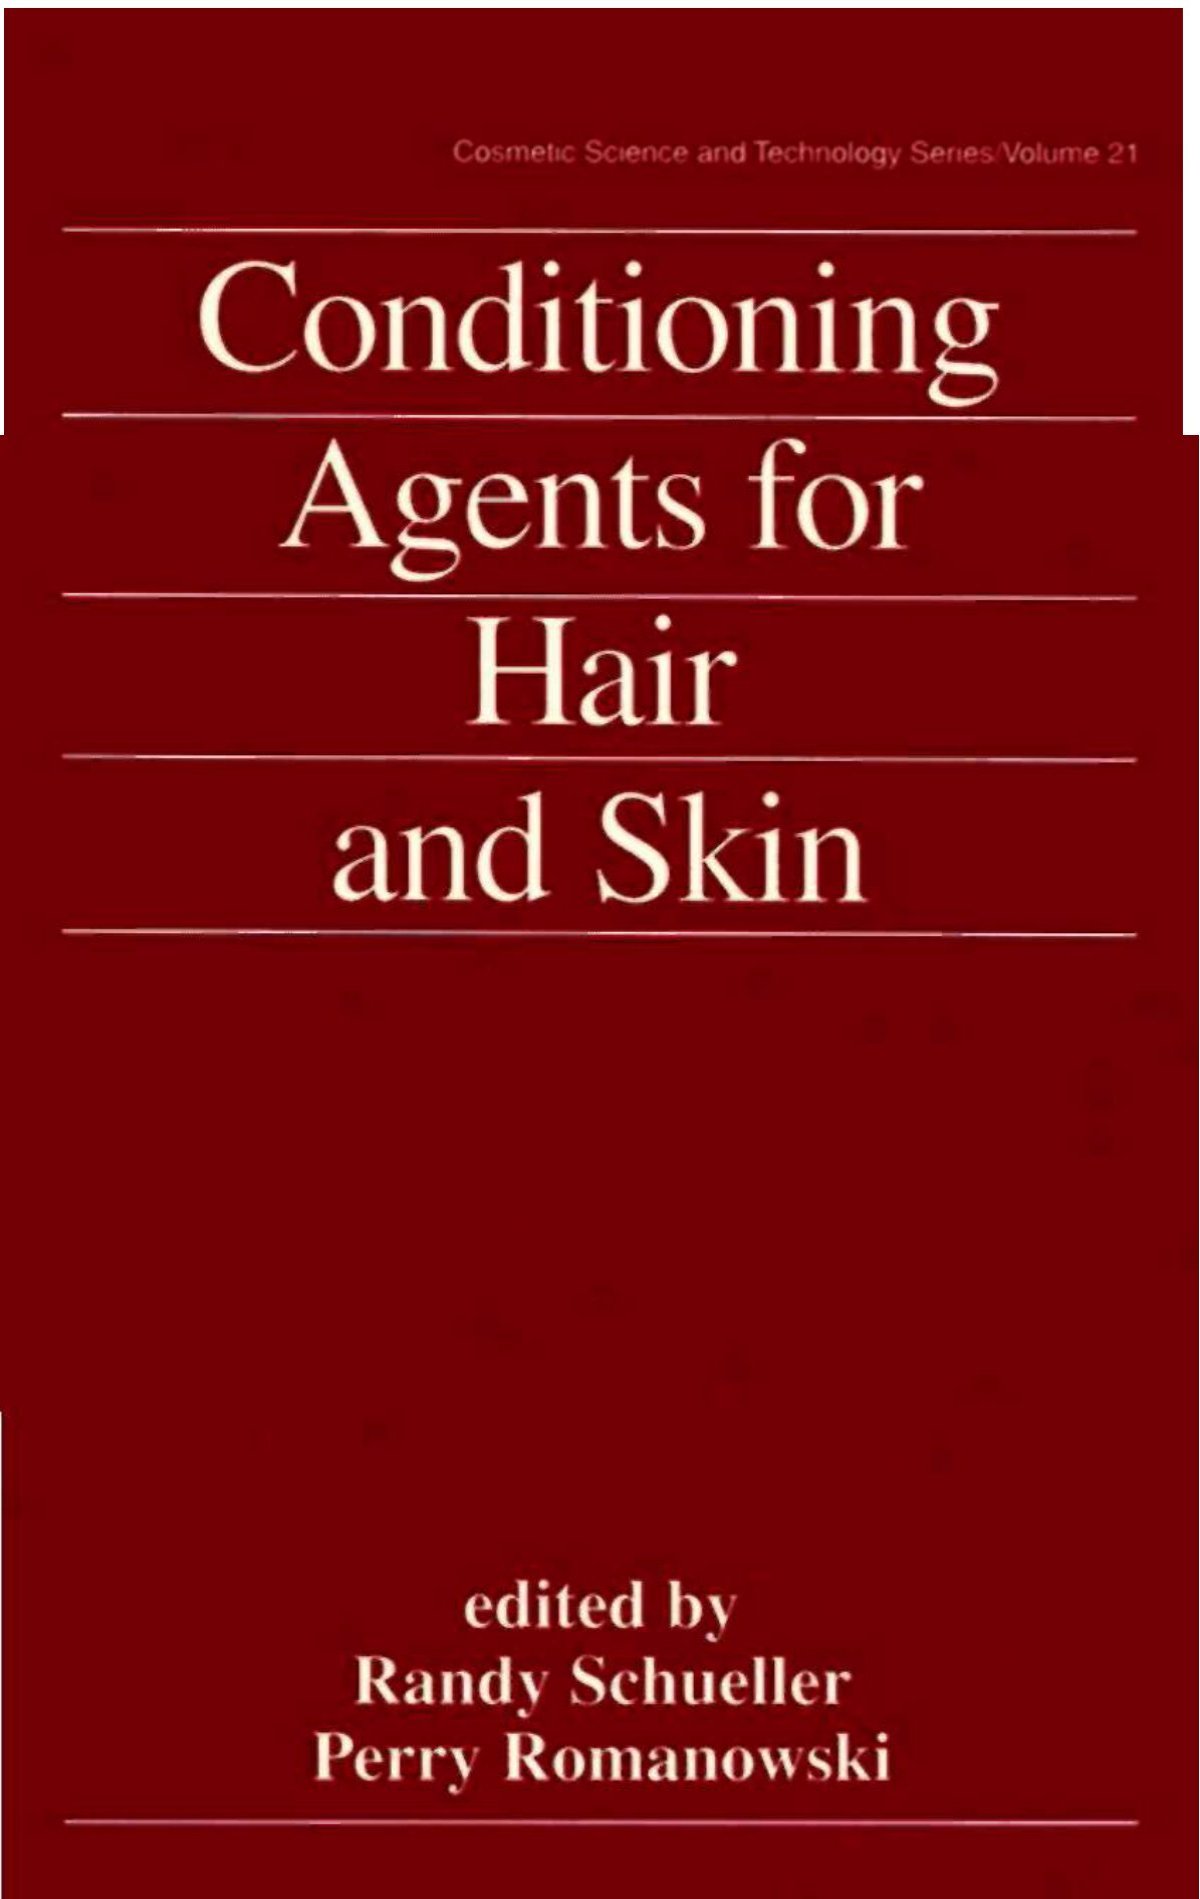 chemical and physical behaviour of human hair clarence r robbins